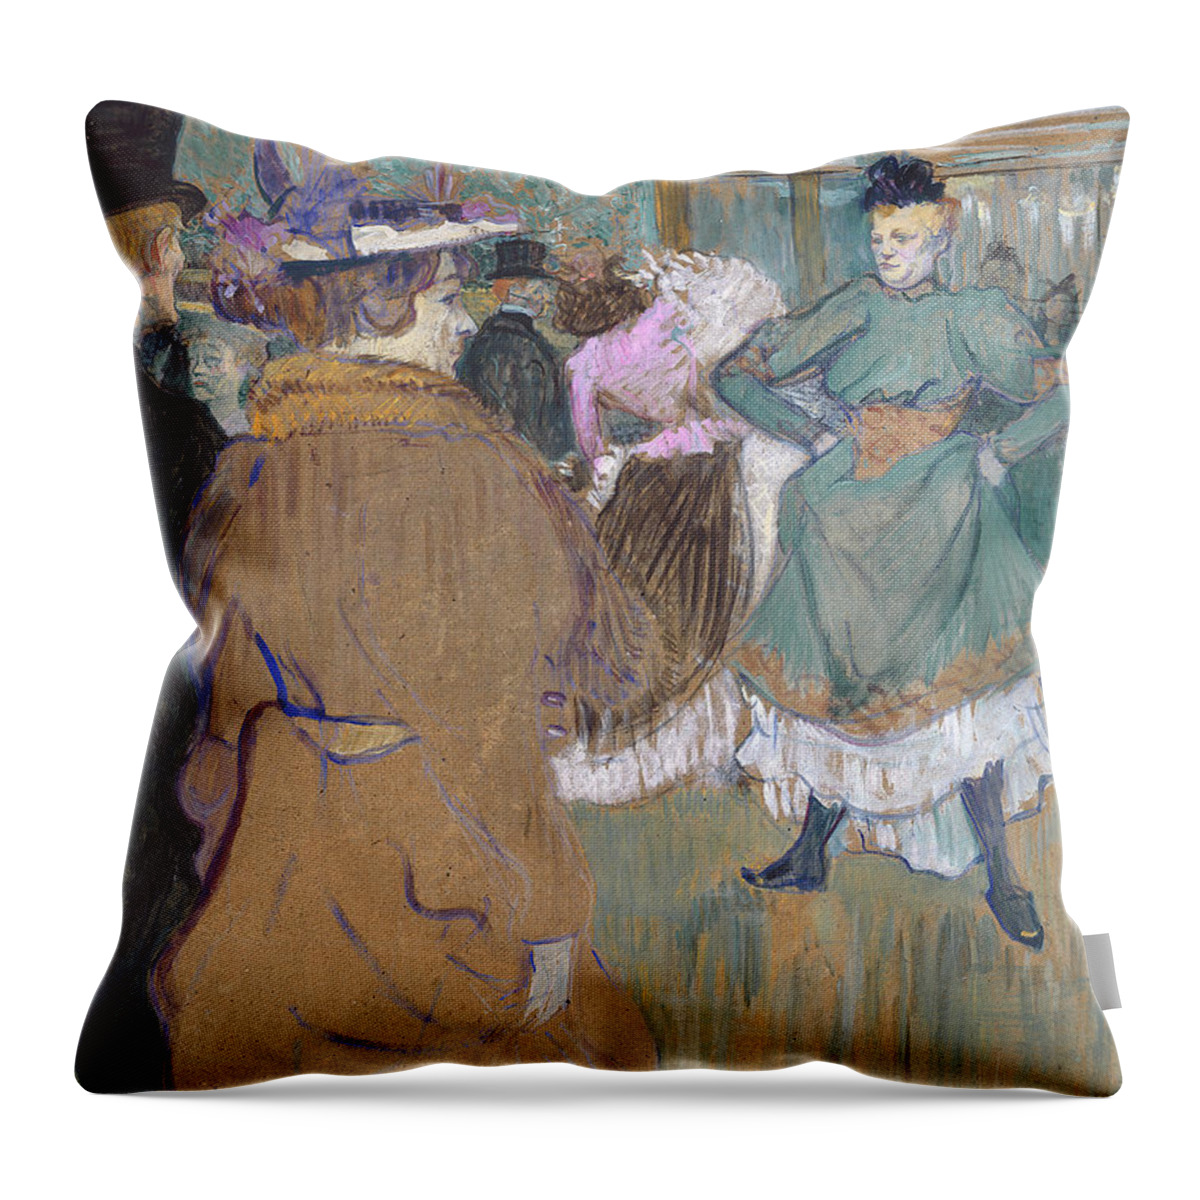 Moulin-rouge Throw Pillow featuring the painting Quadrille At The Moulin Rouge, 1892 by Henri de Toulouse-Lautrec